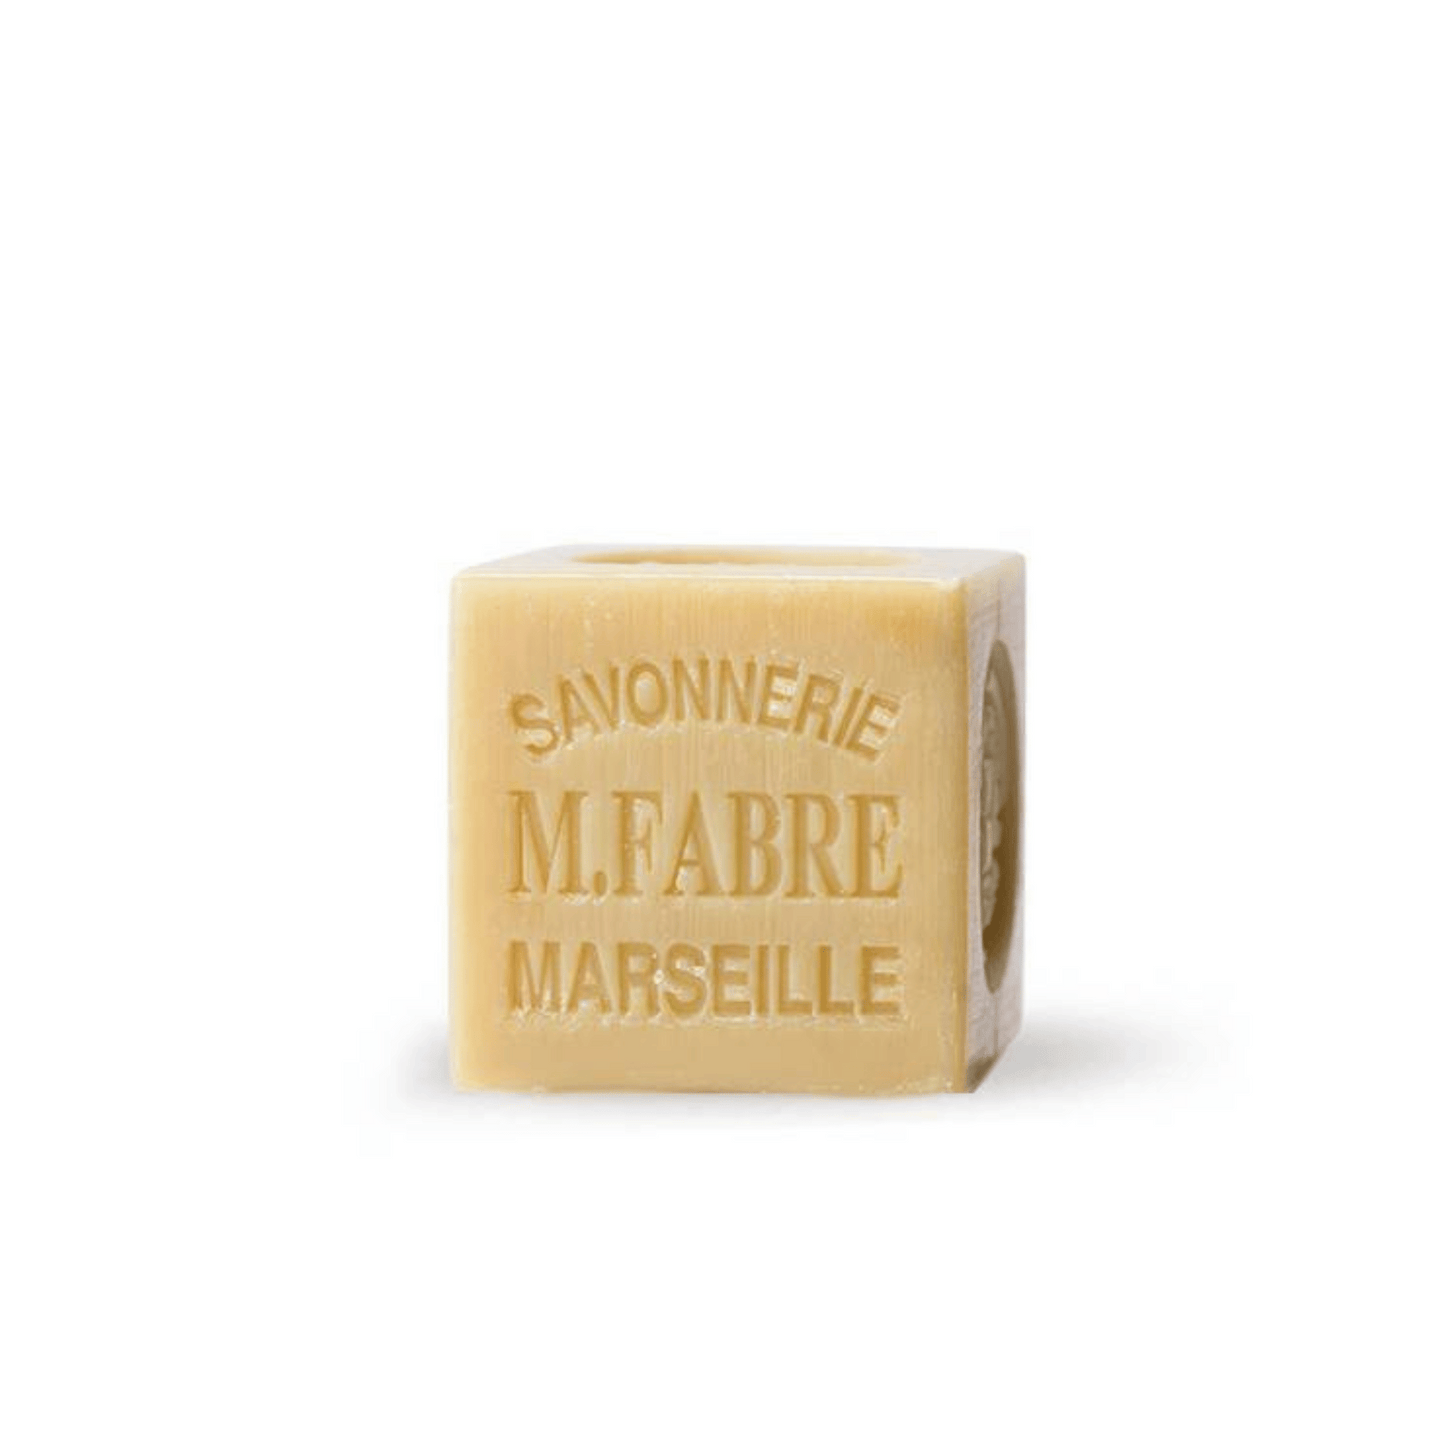 Primary Image of Marseille Laundry Soap